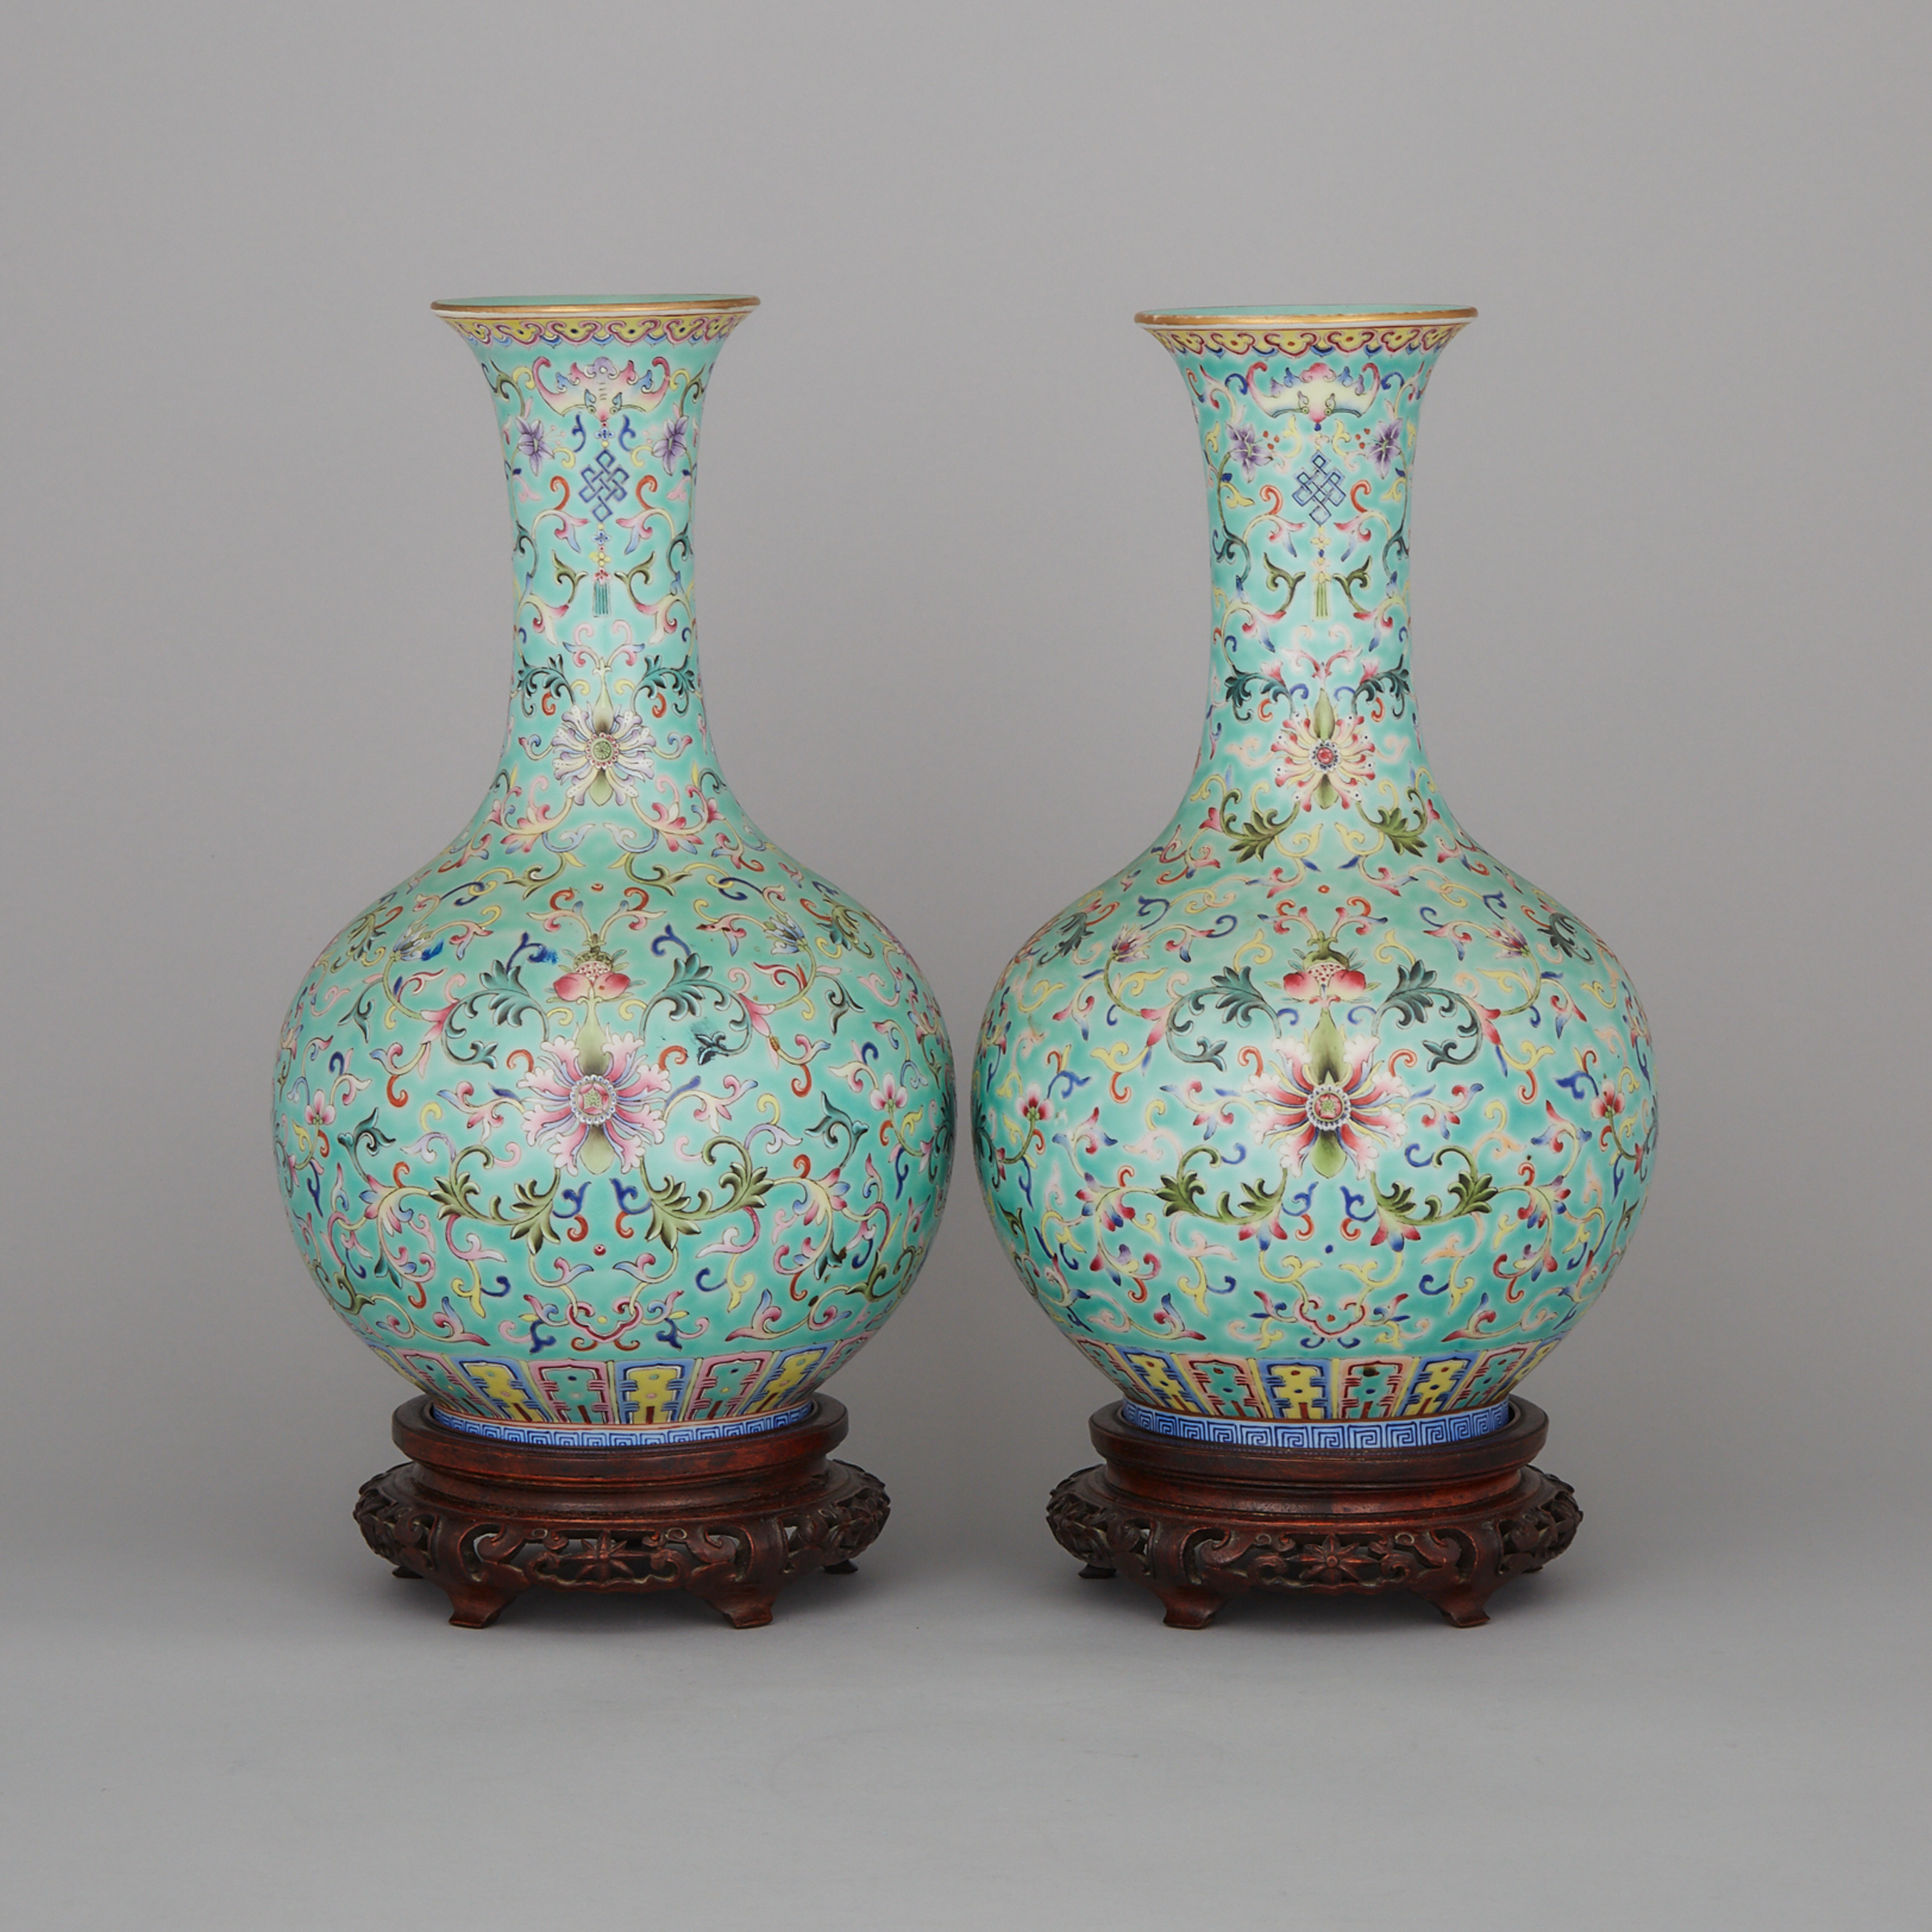 A Pair of Turquoise-Ground Famille Rose Vases, Jiaqing Mark, Late 19th Century